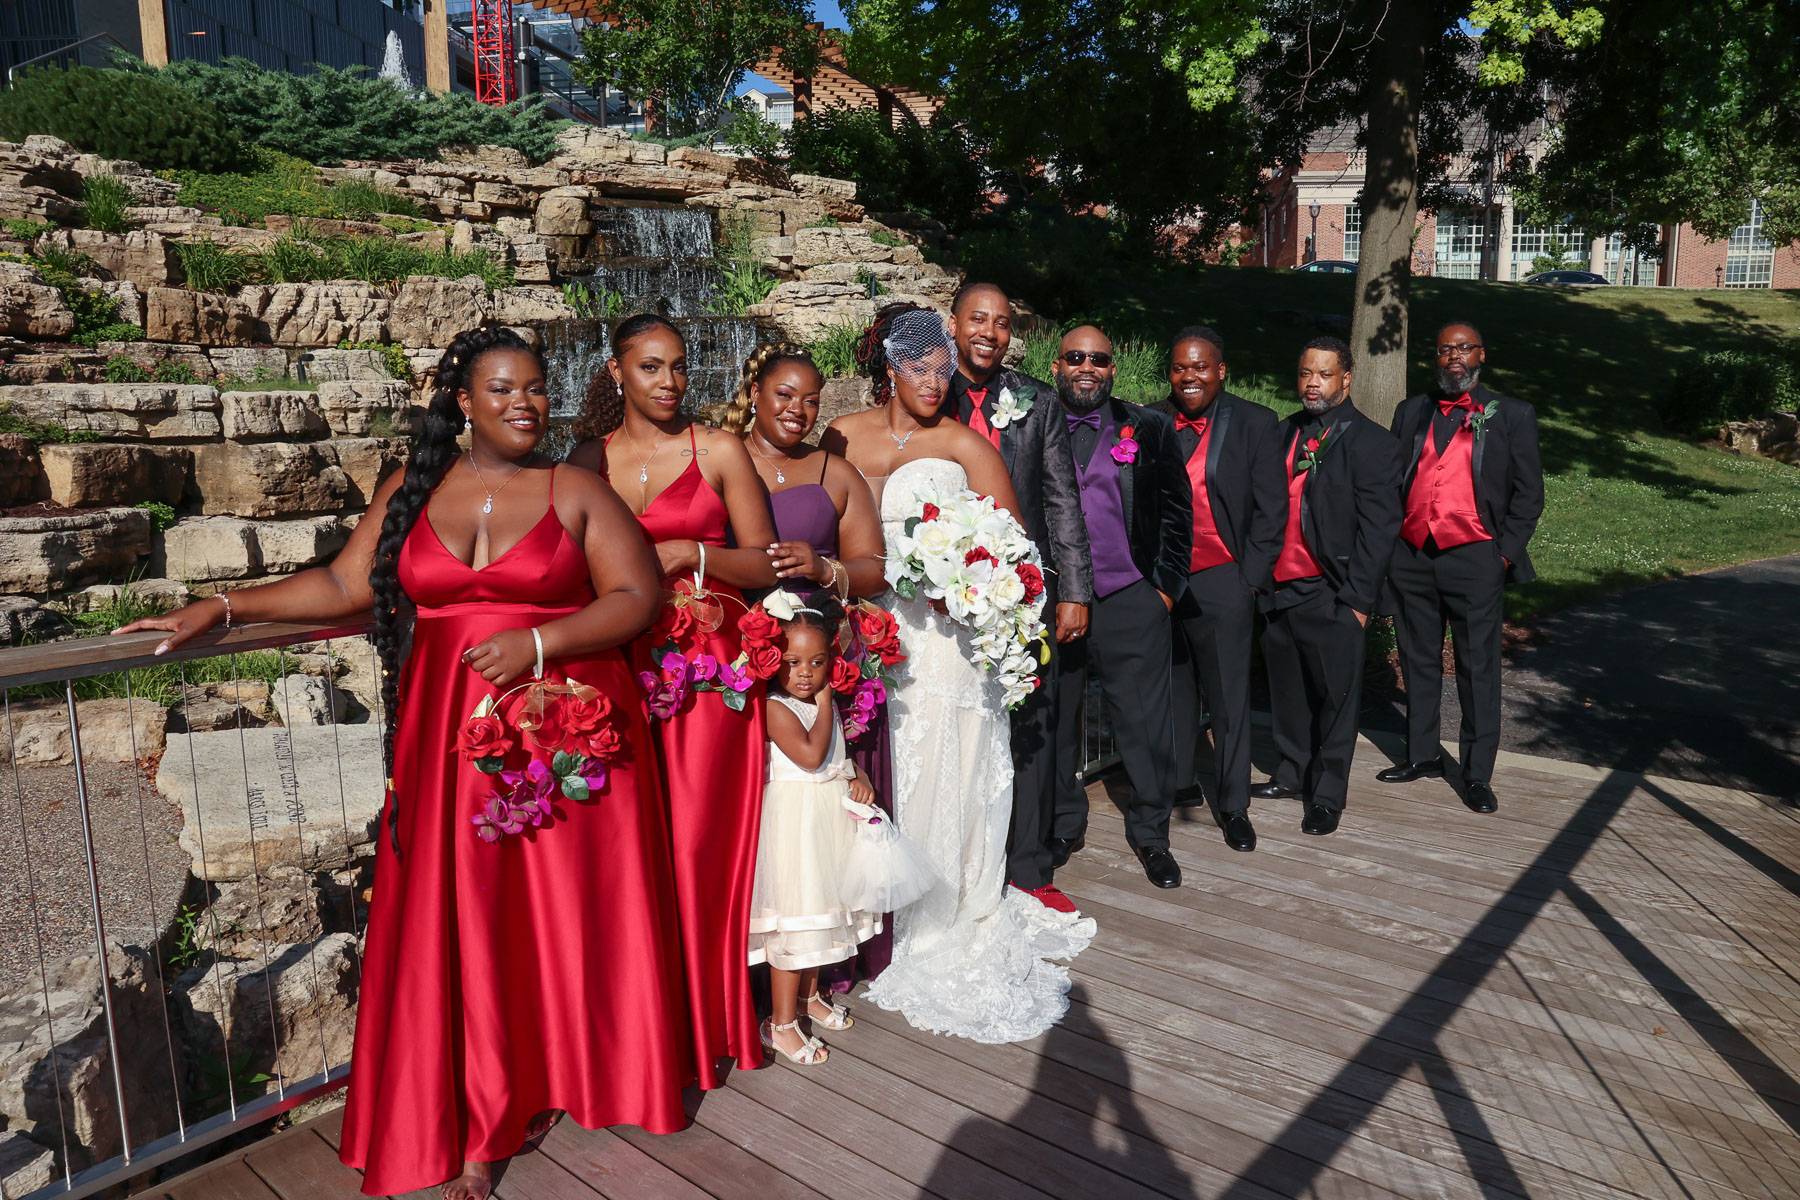 The newlyweds and their attendants on a bridge